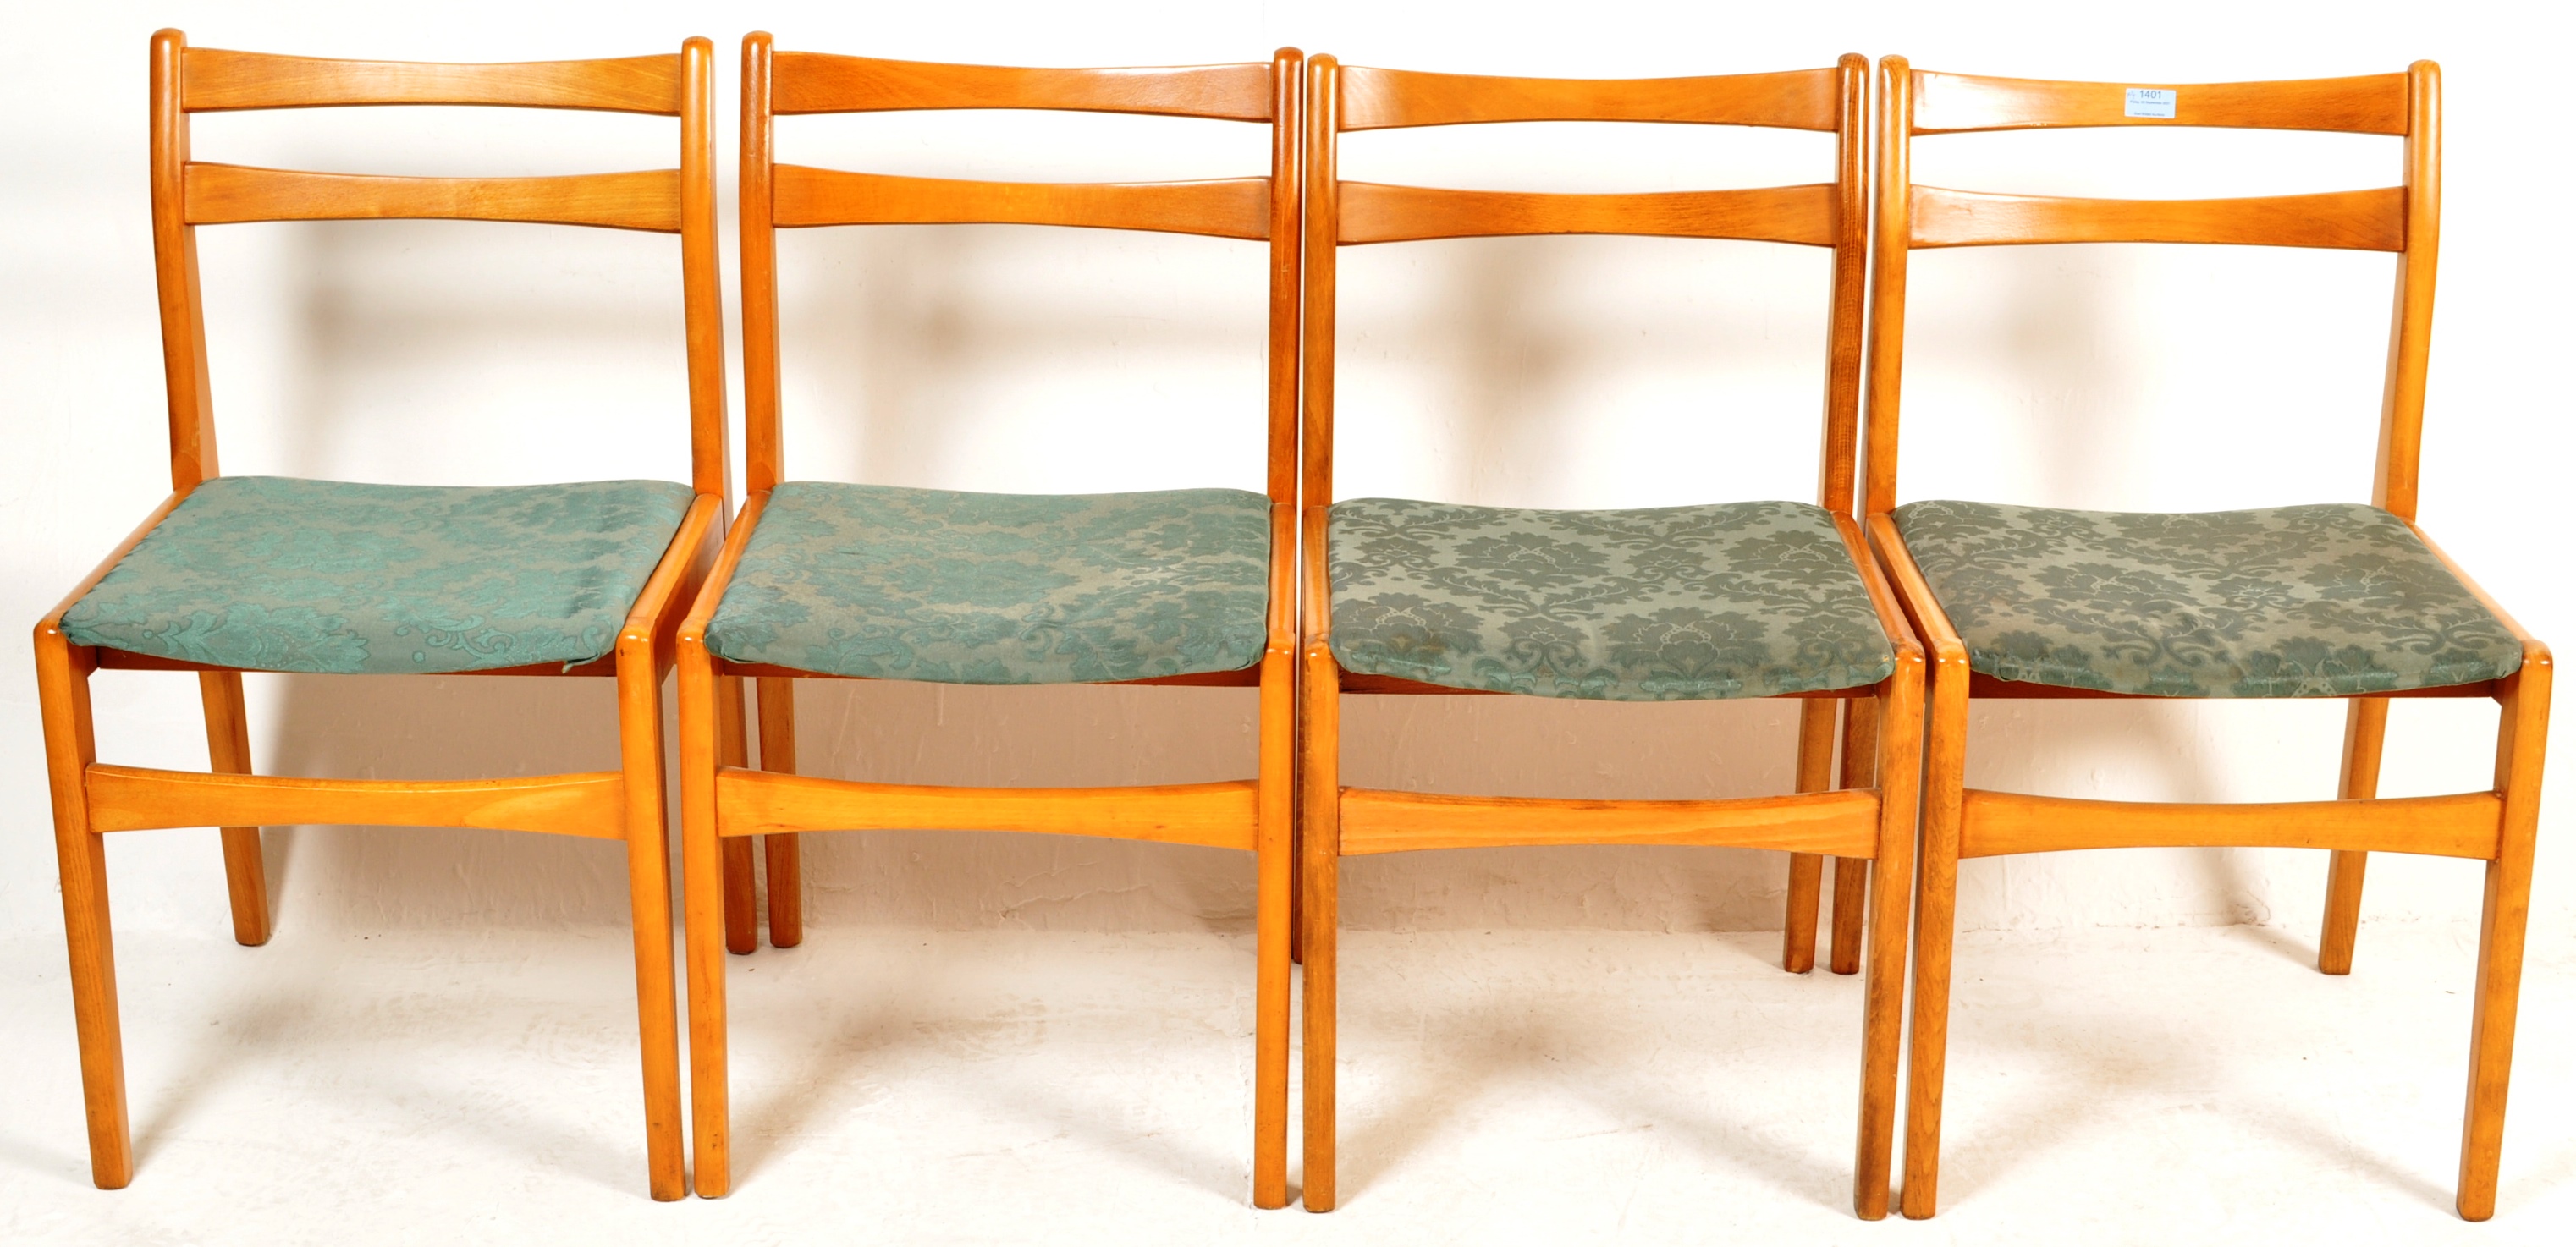 SET OF FOUR VINTAGE MID 20TH CENTURY DINING CHAIRS - Image 2 of 7